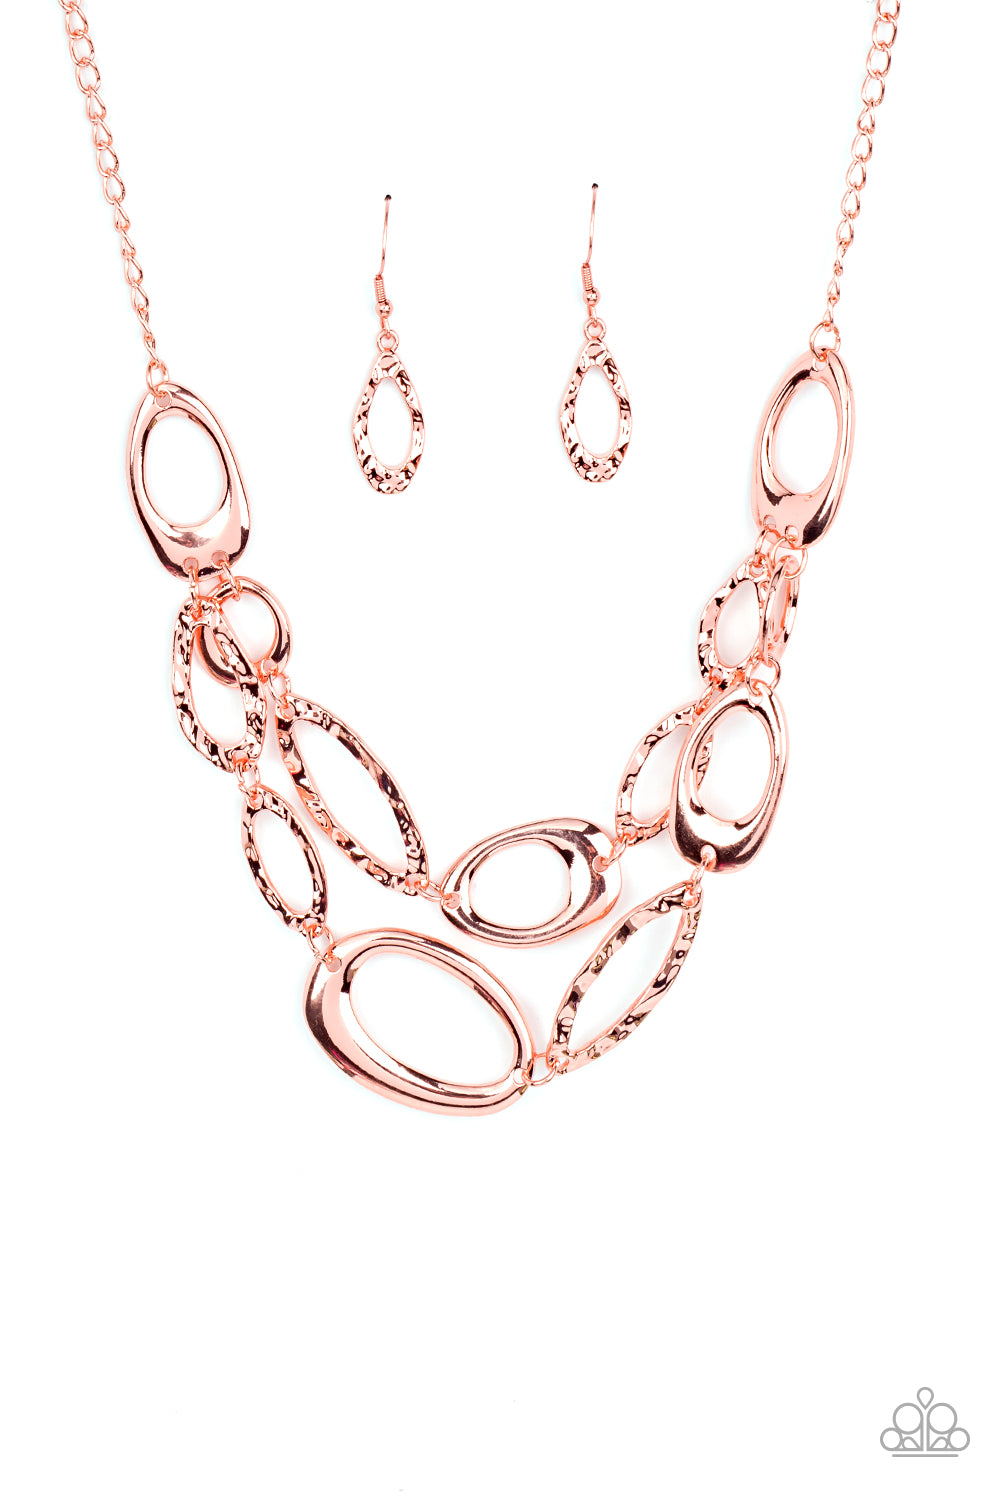 Game OVAL Paparazzi Accessories Necklace with Earrings Copper